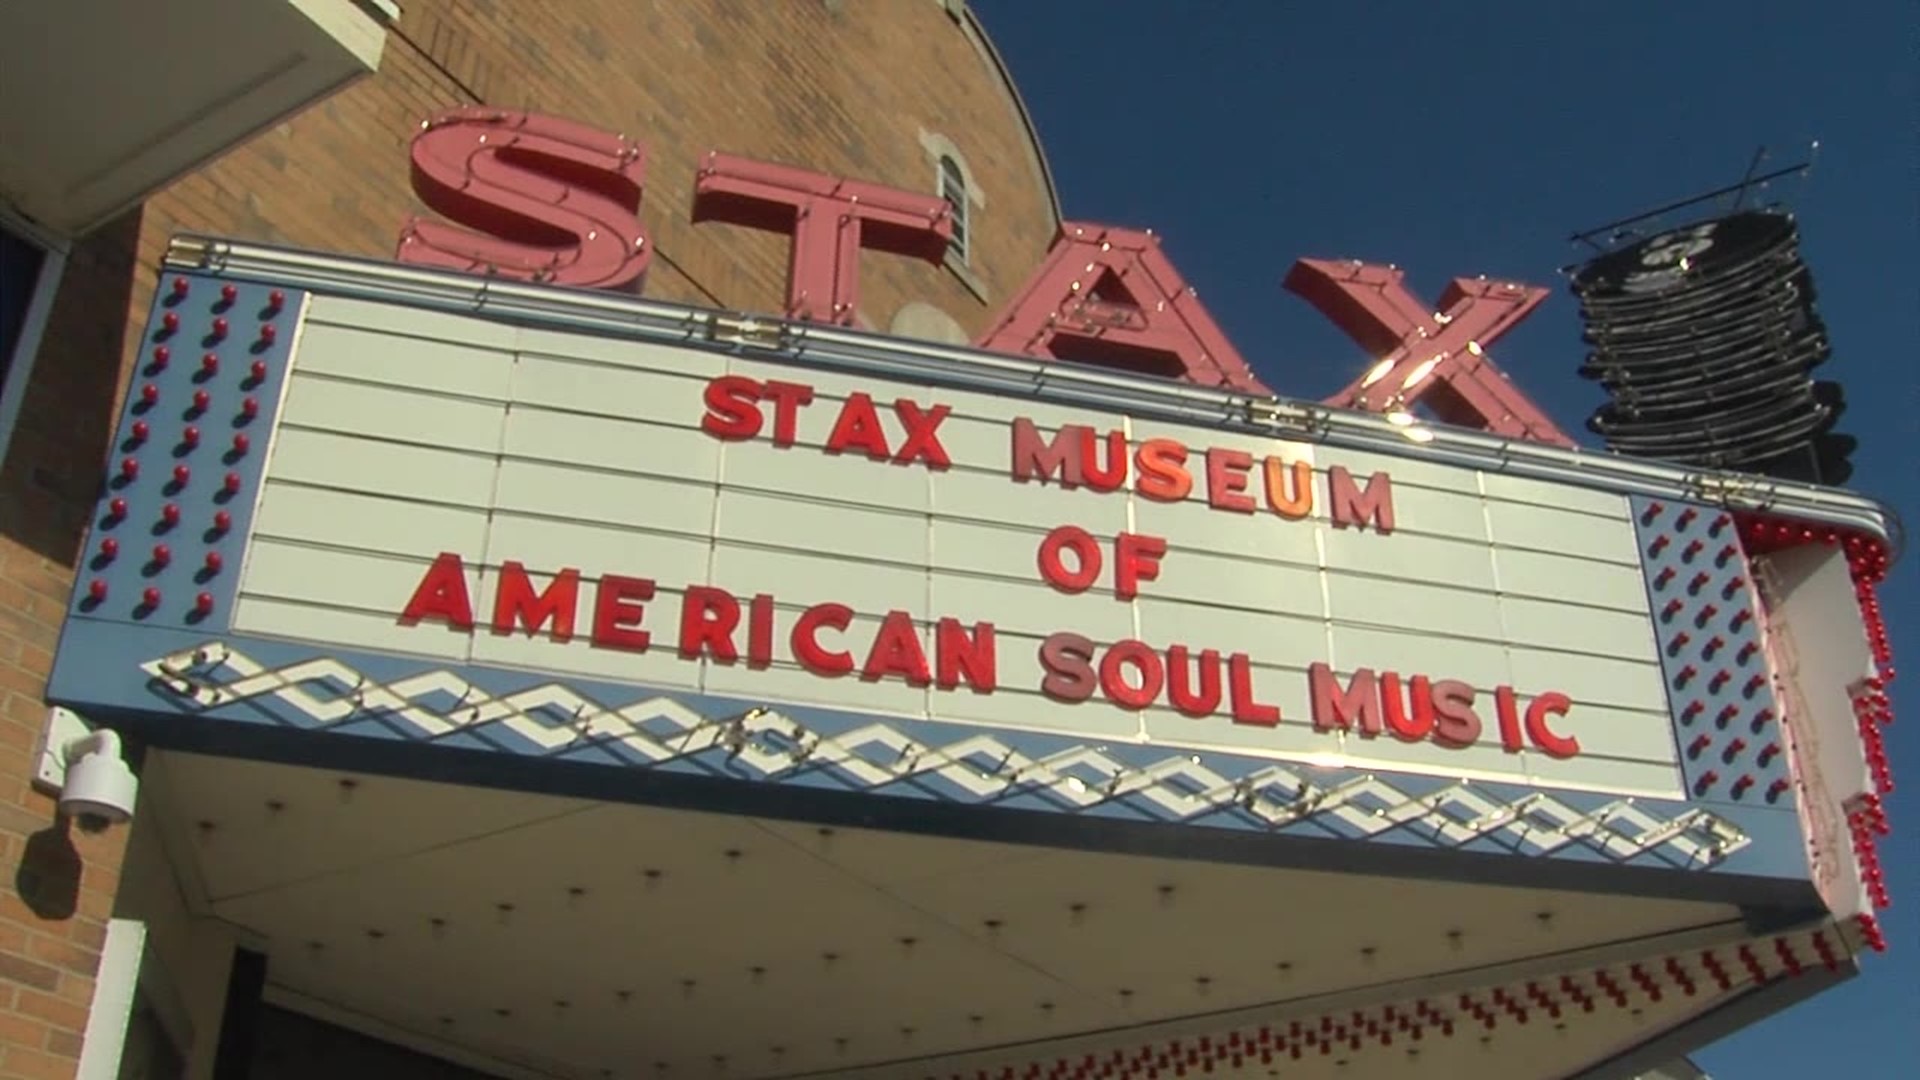 A behind the scenes look at Stax Museum of American Soul Music in South Memphis